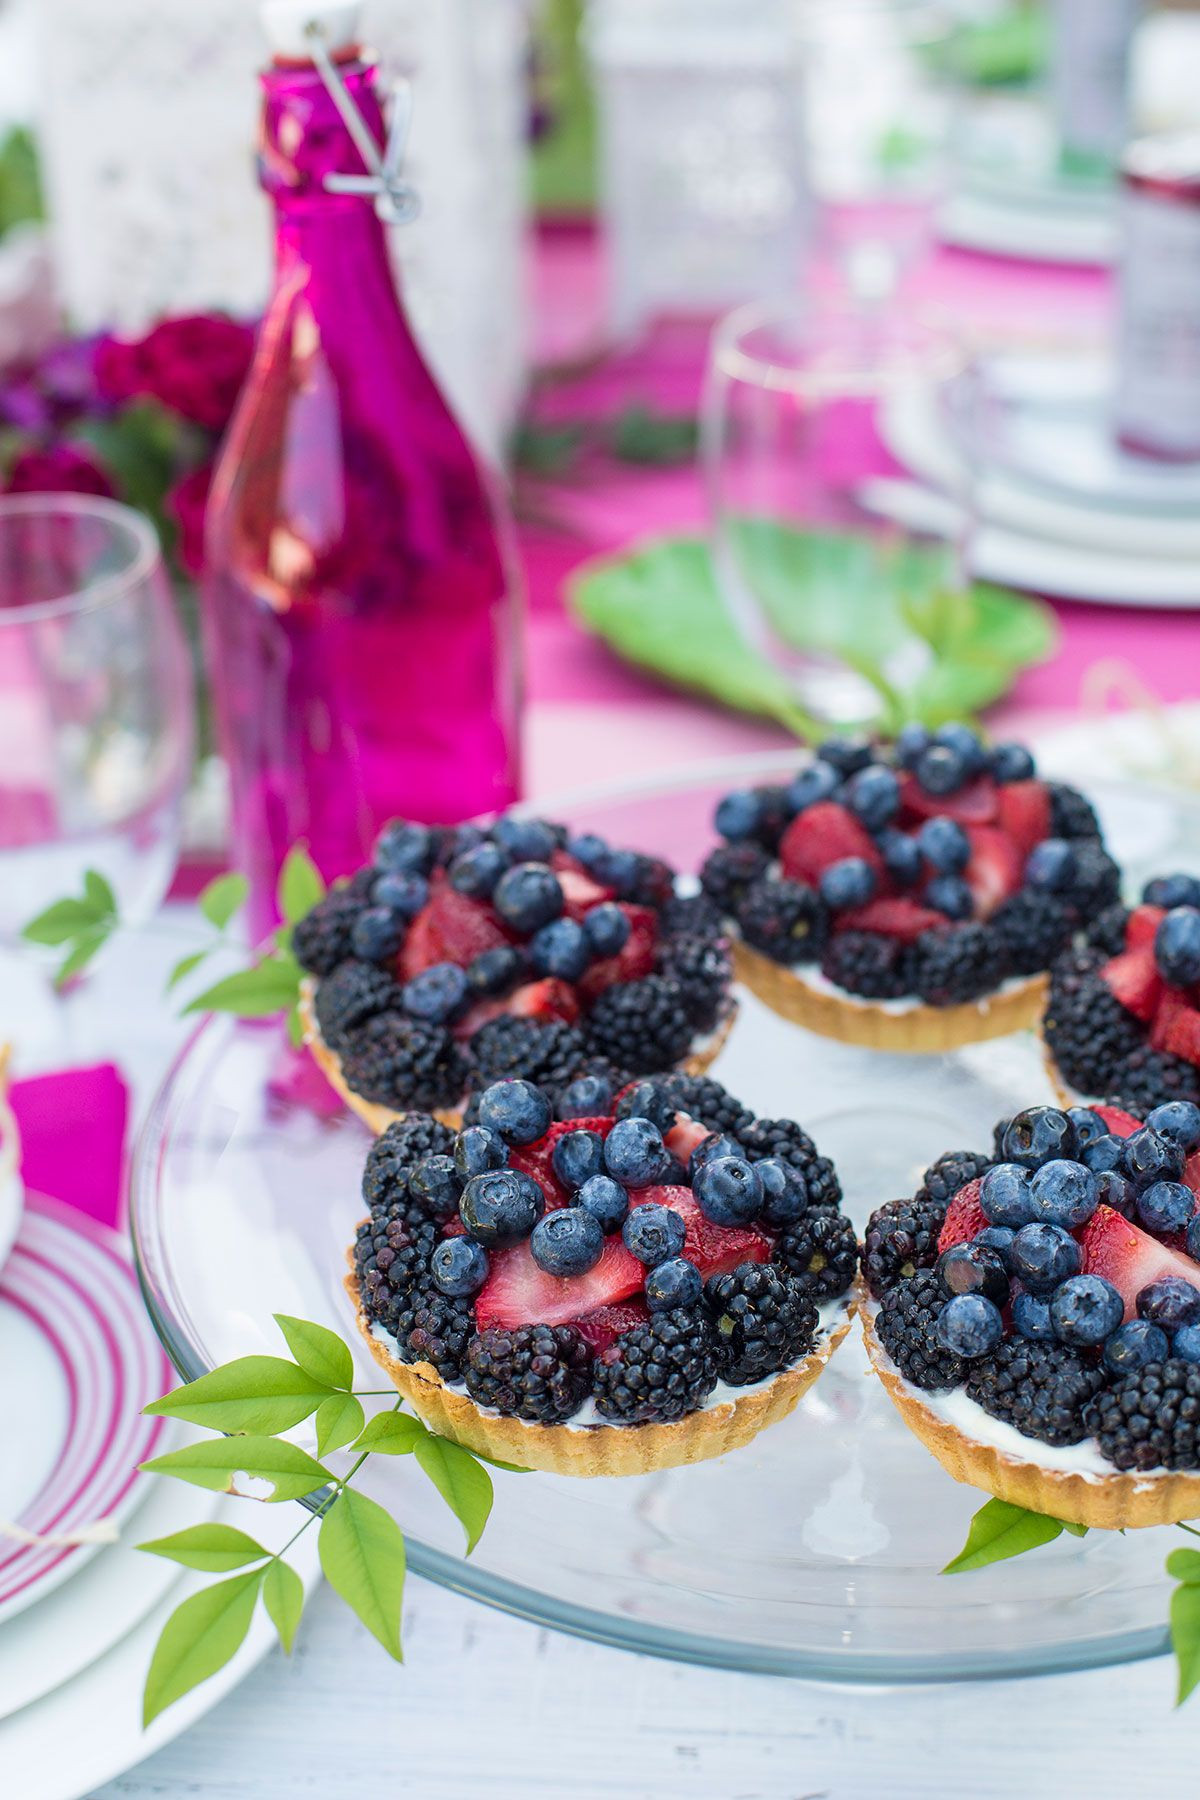 Summer Party Food Ideas For Adults
 Tips for stylish summer soirees